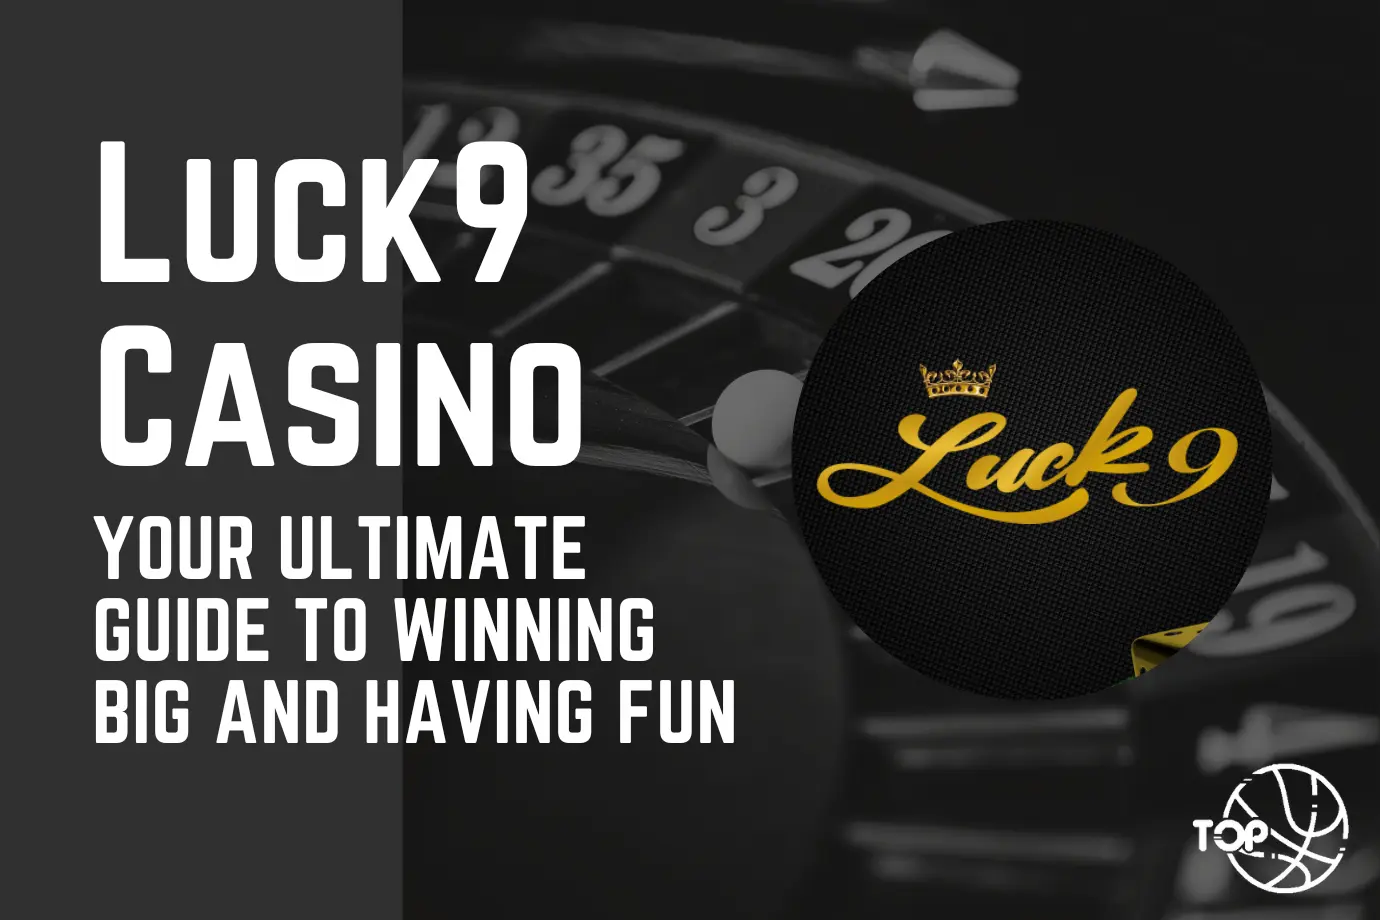 Luck9 Casino: Your Ultimate Guide to Winning Big and Having Fun